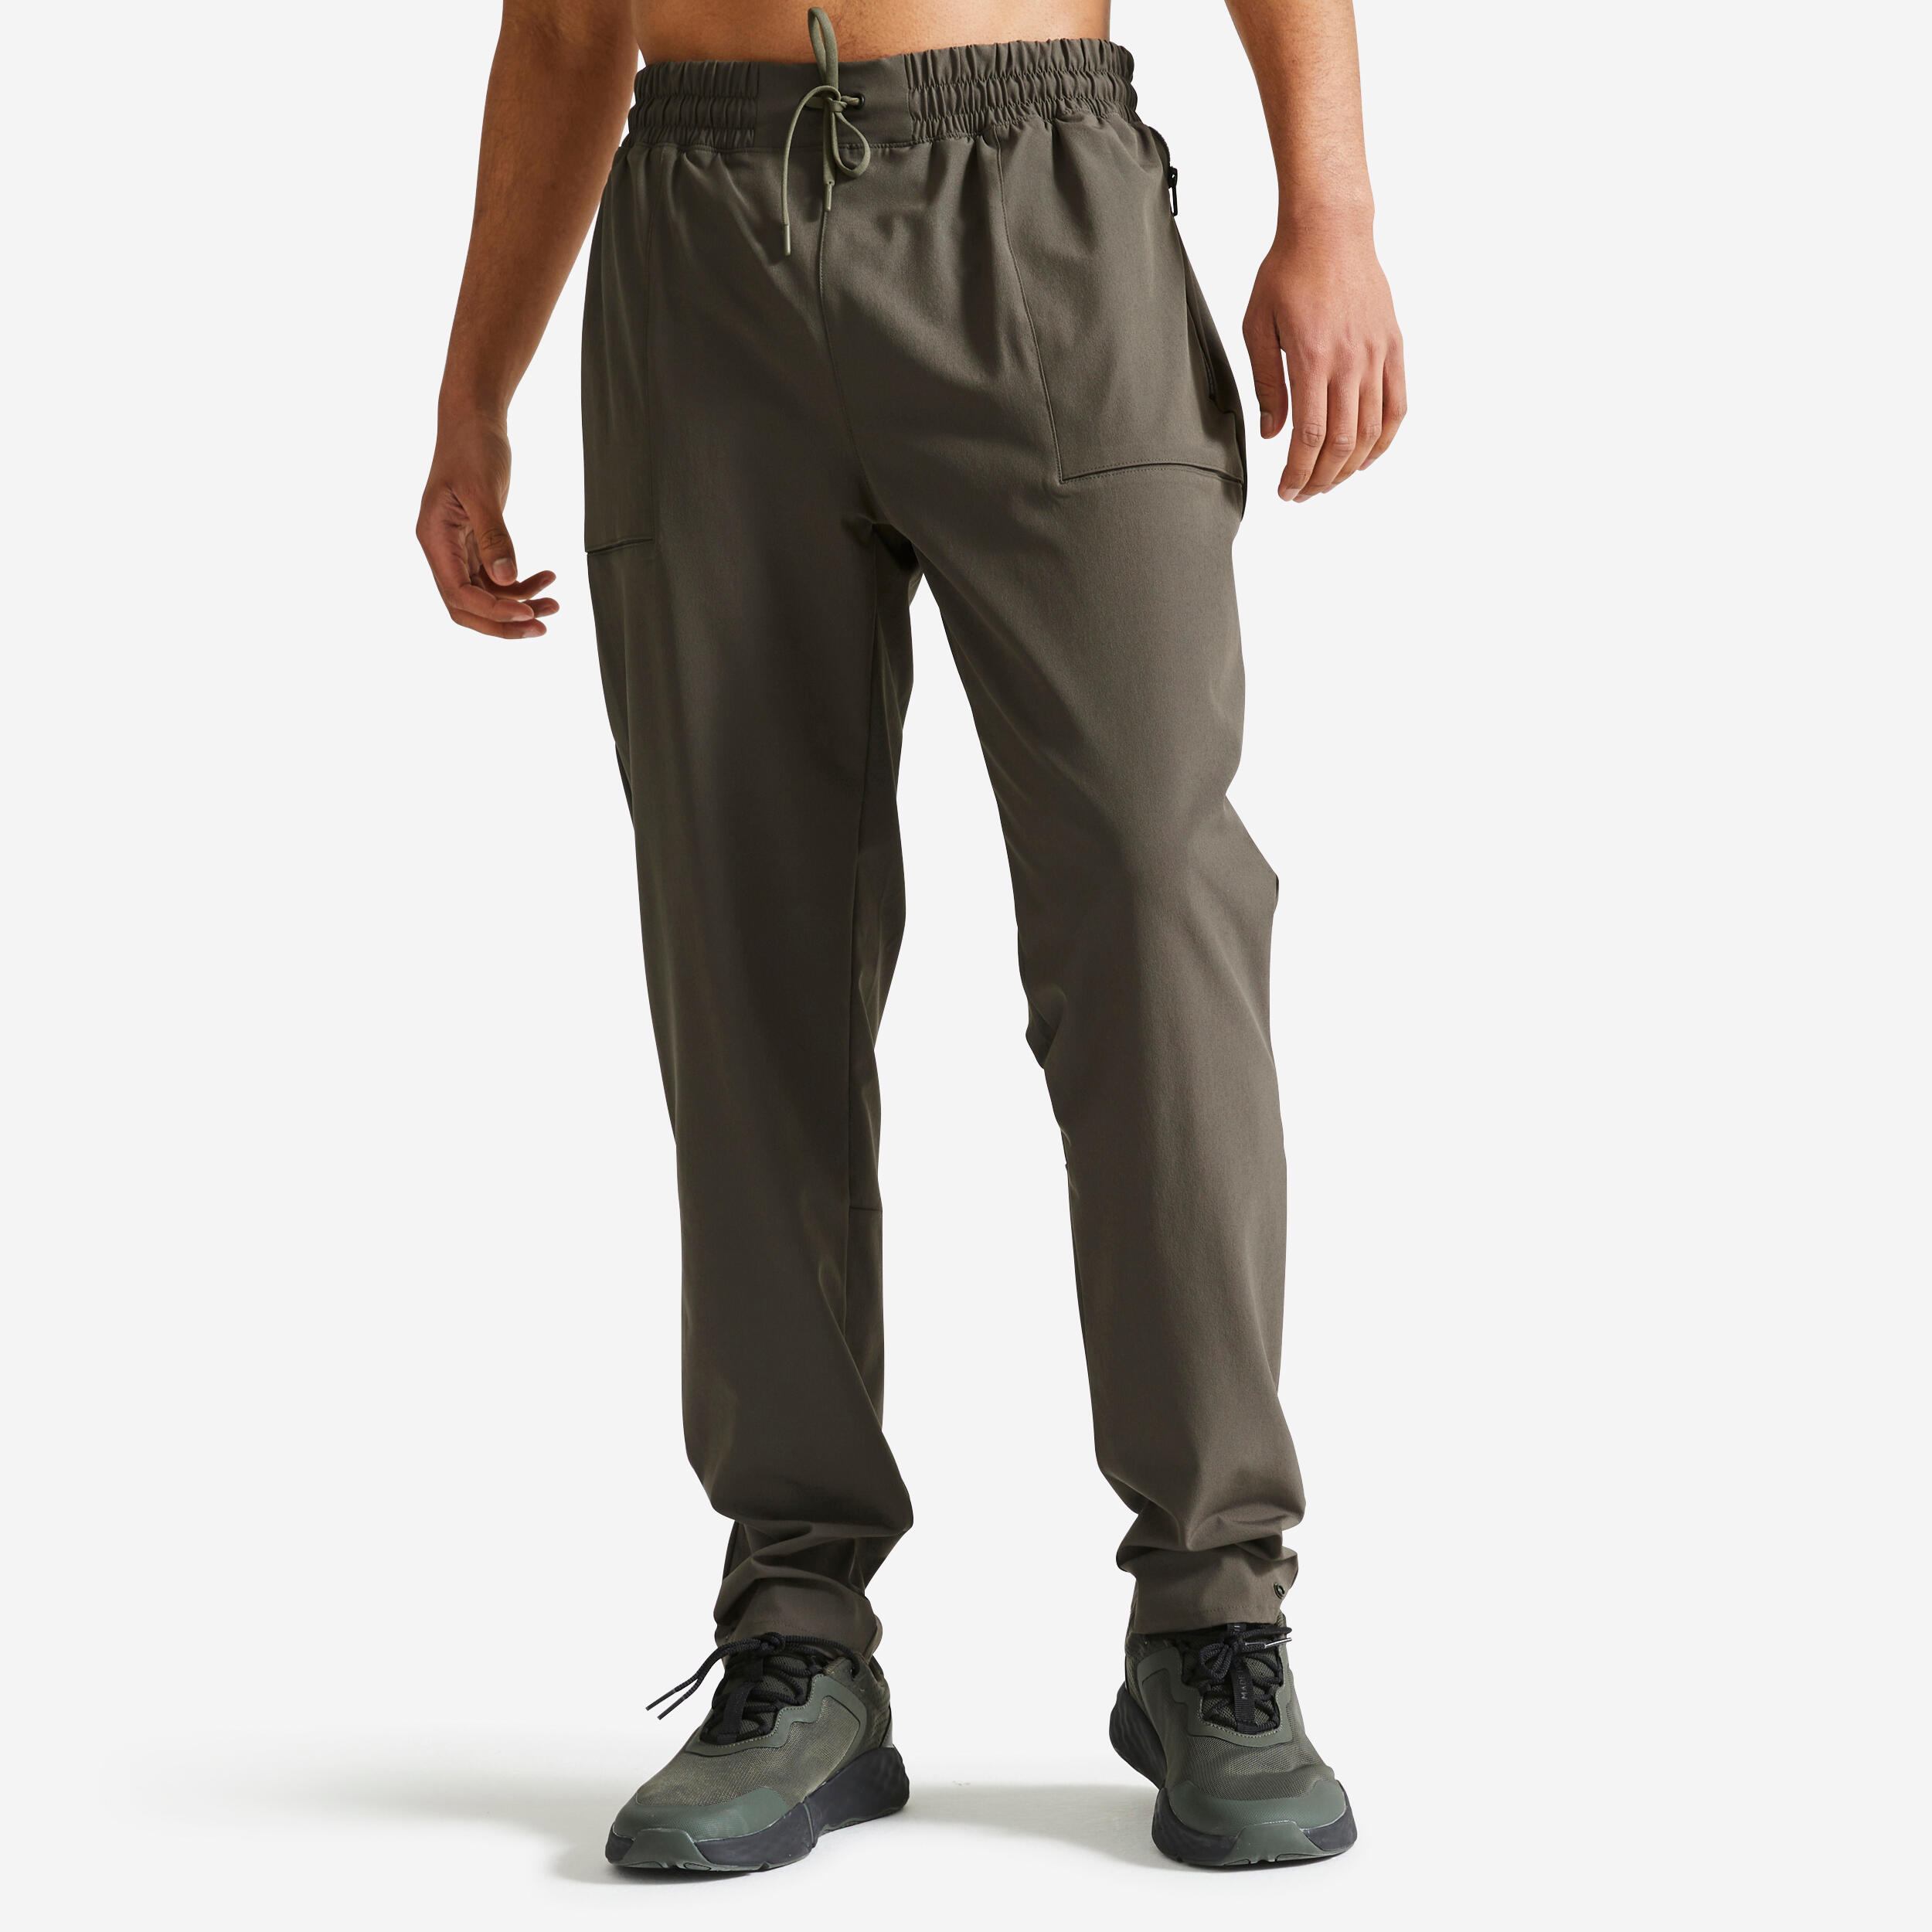 Decathlon Track Pant Review - YouTube